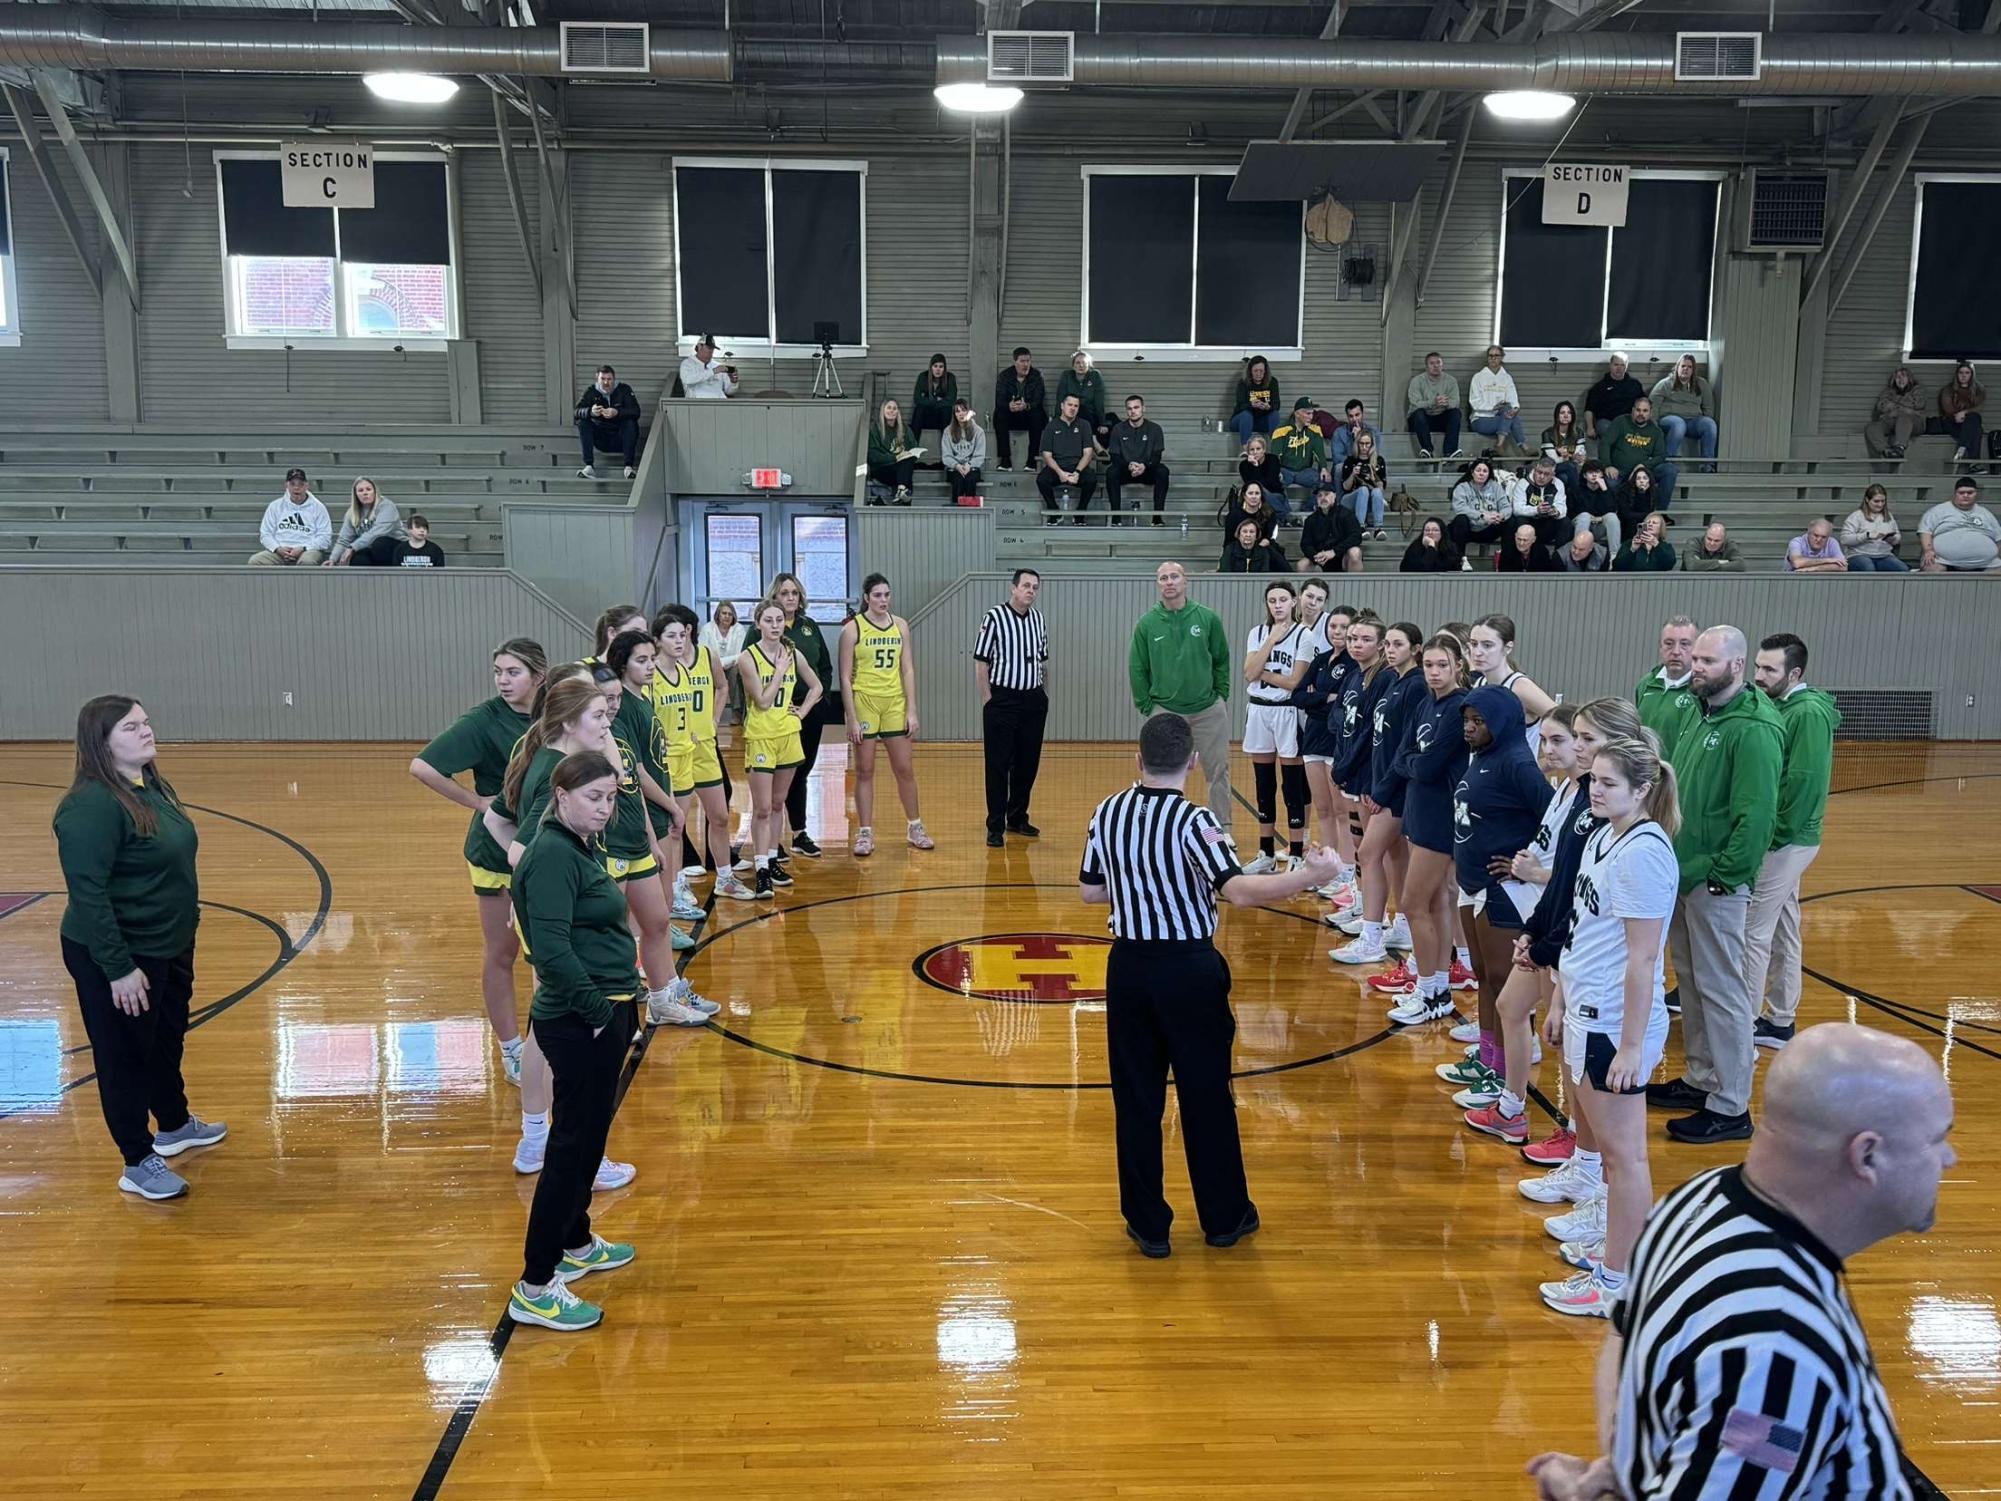 Lindbergh High School and MHS line up at half-court in the historic Hoosier Gym in Knightstown, Indiana, before tip-off on Saturday, Feb. 3. MHS went on to take a 58-40 victory. 